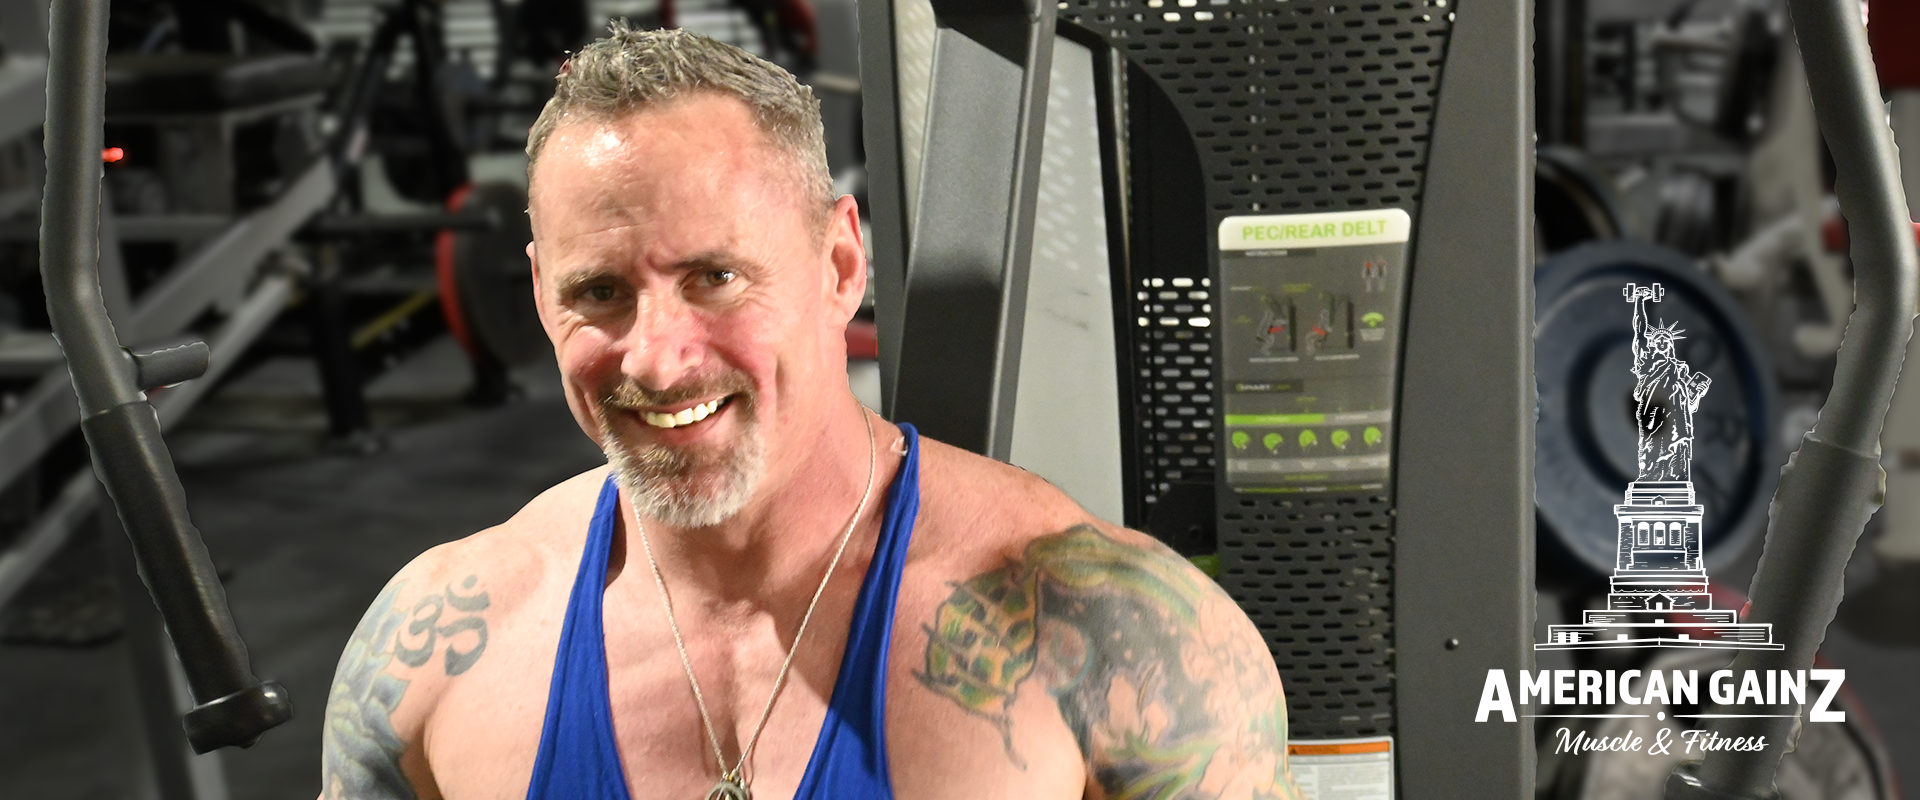 Personal Trainer, Greg Maloney, smiling whilst working out at Armbrust Pro Gym, in Colorado.